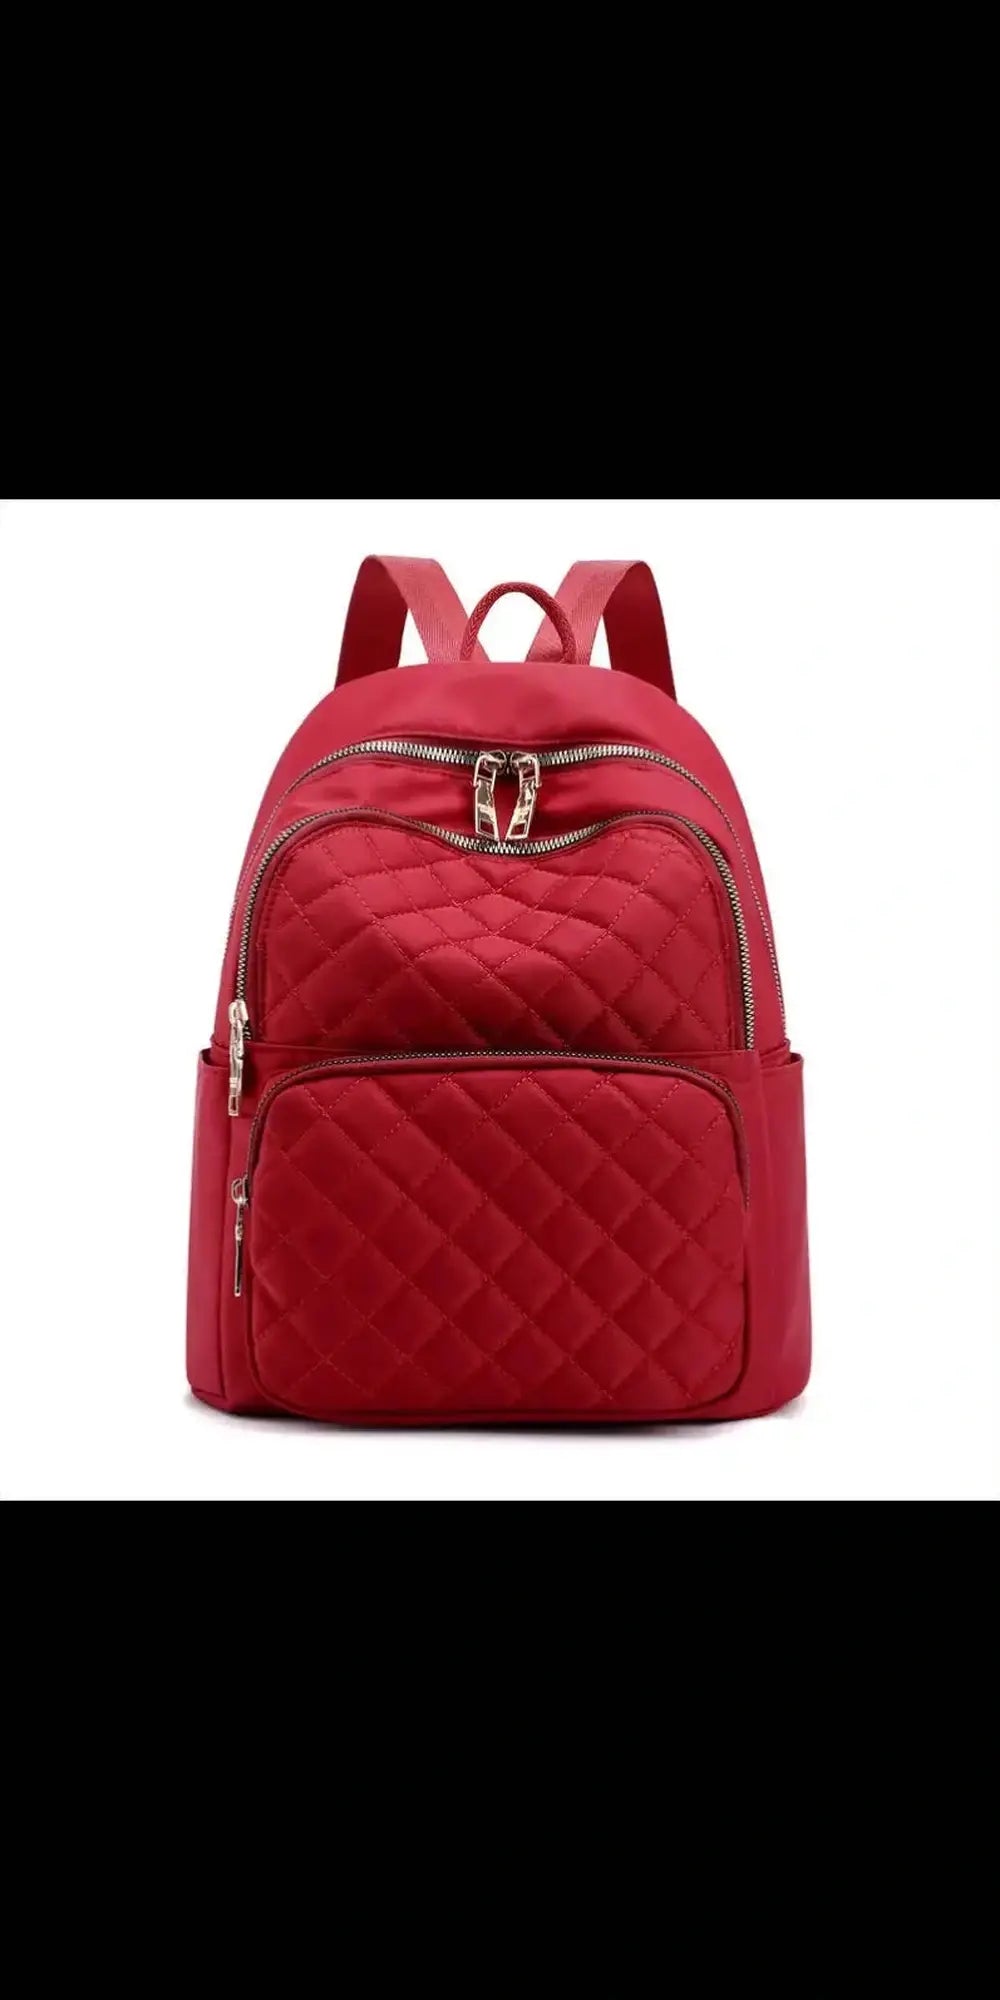 Women Backpack - Red - bags